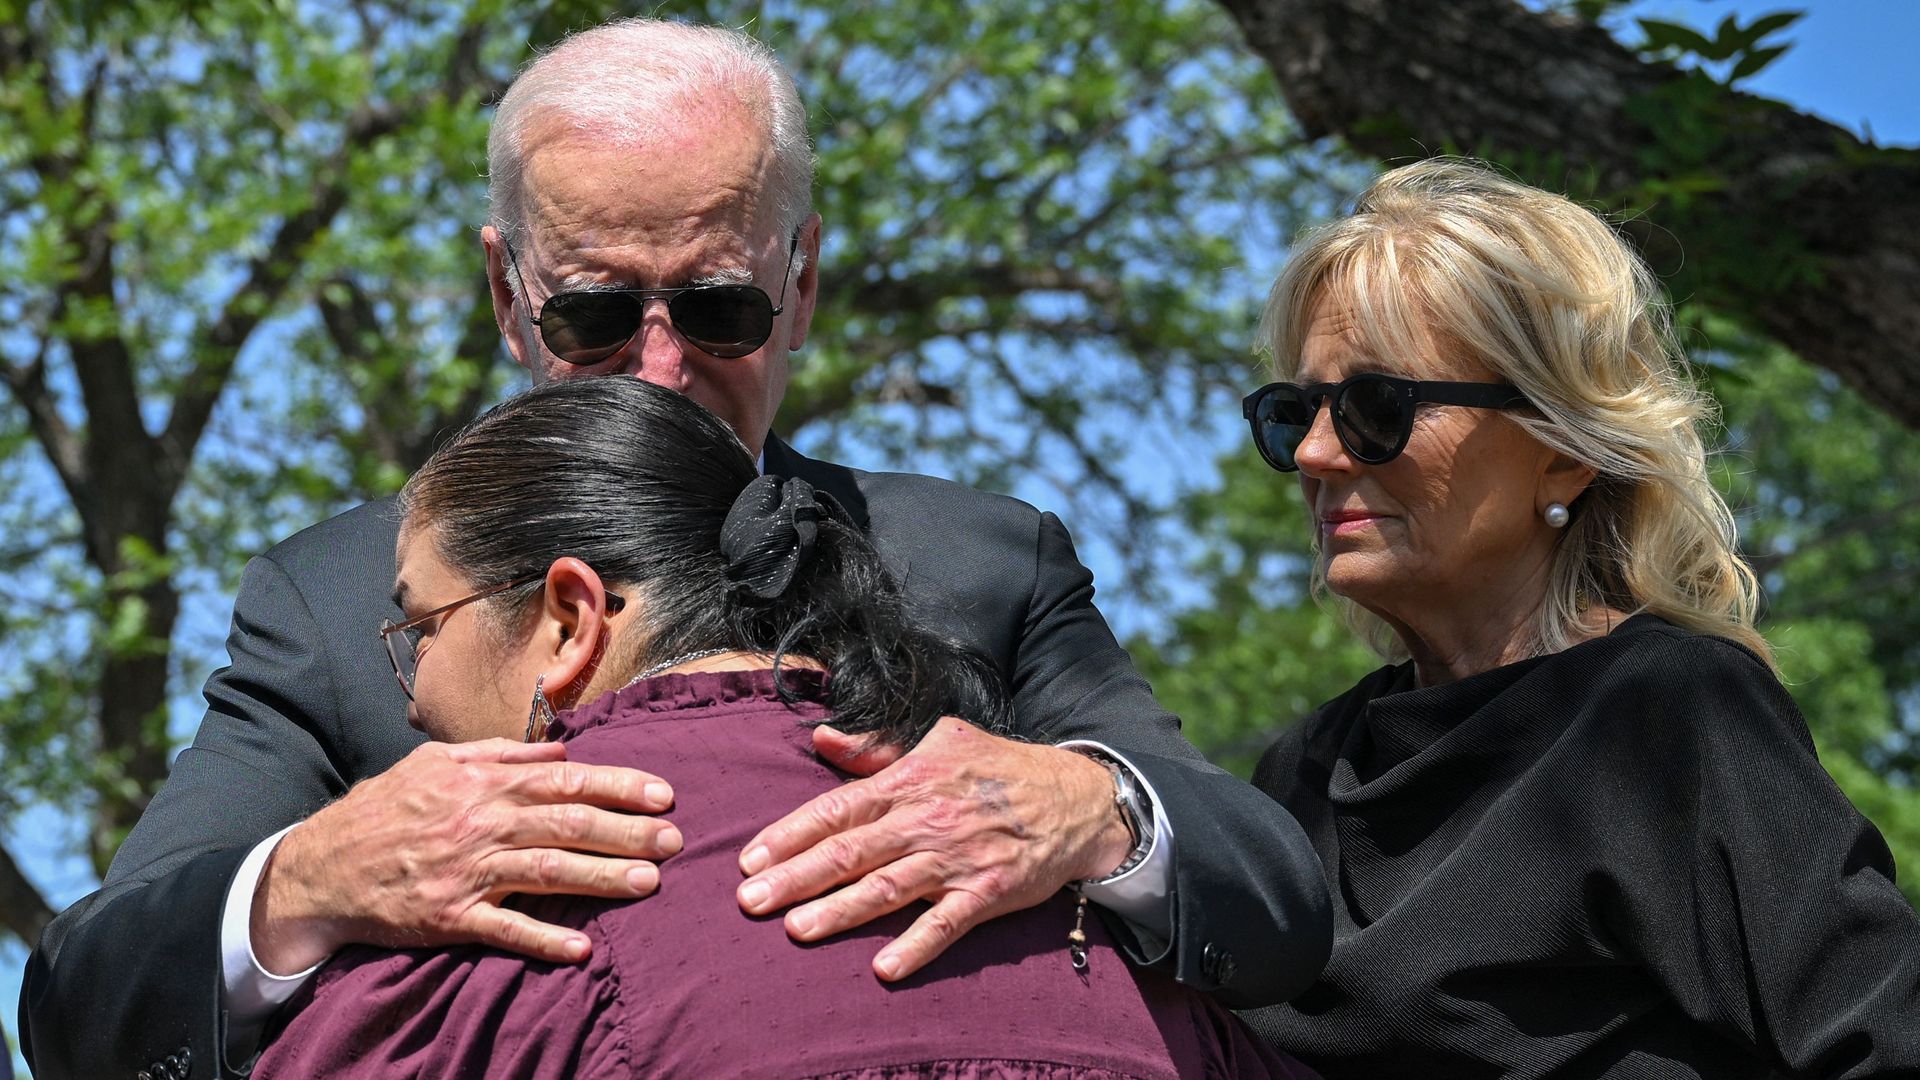 President Joe Biden embraces Mandy Gutierrez, the Priciple of Robb Elementary School, as he and First Lady Jill Biden pay their in Uvalde, Texas on May 29.